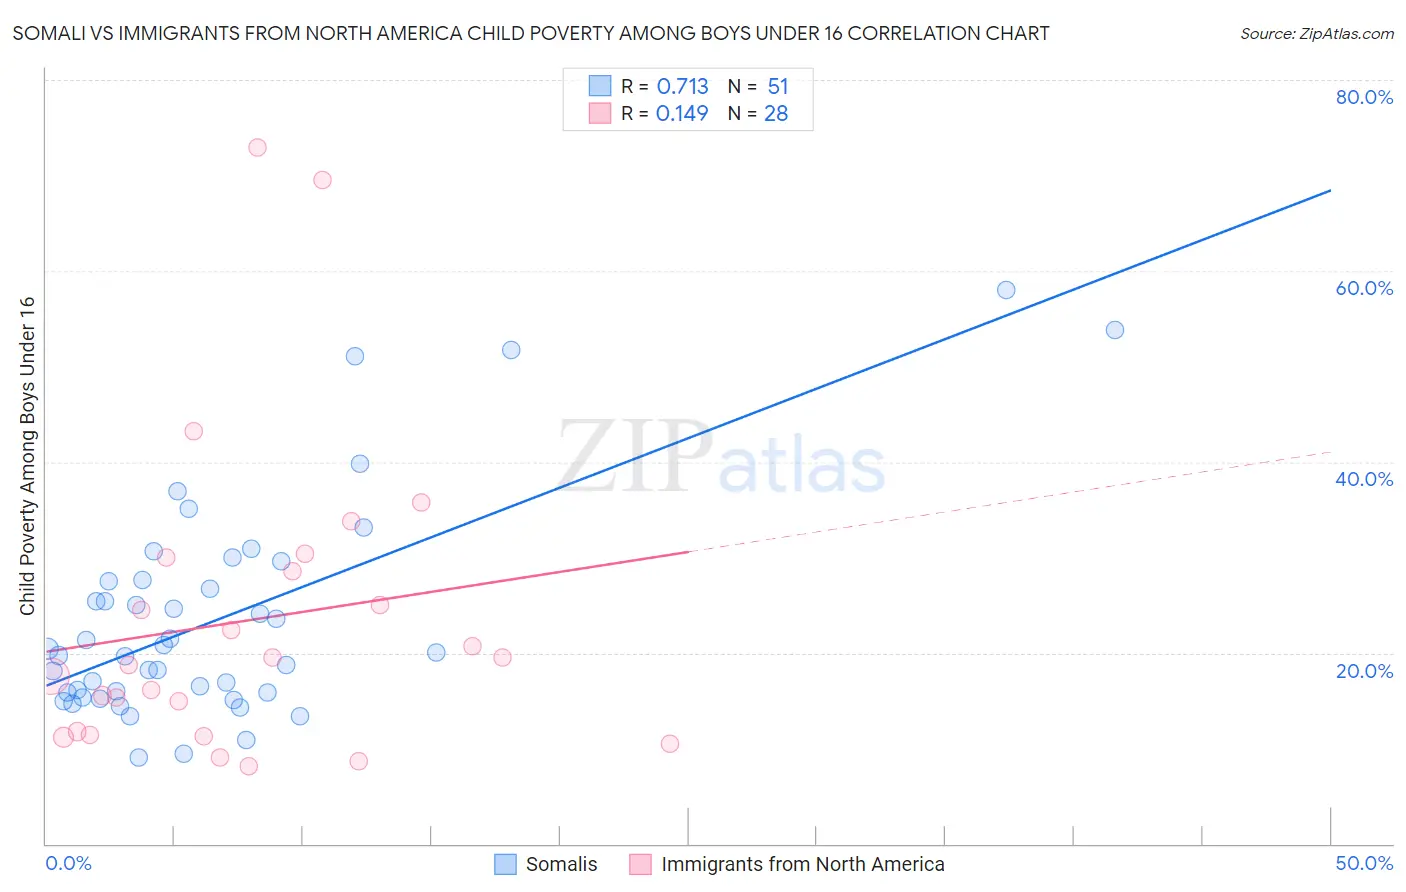 Somali vs Immigrants from North America Child Poverty Among Boys Under 16